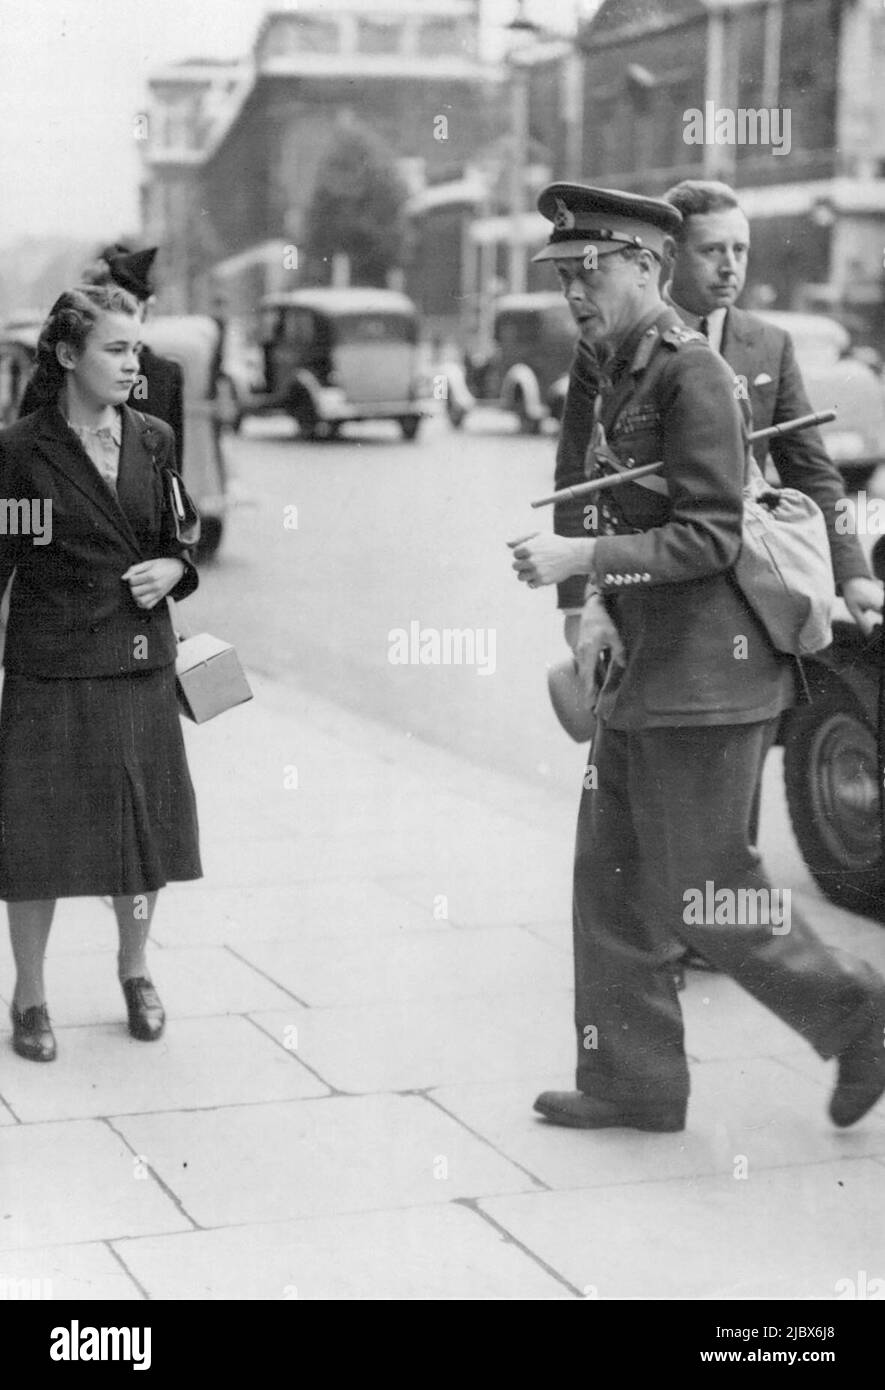 First Picture of Duke of Windsor in Uniform: The Duke of Windsor, in uniform of a Major-General, arriving at the War Office this afternoon. The Duke of Windsor, who is entitled to Fieldmarshal's Rank, has taken the Rank of Major-General so that he may serve with the British army overseas. April 23, 1940. (Photo by Keystone). Stock Photo